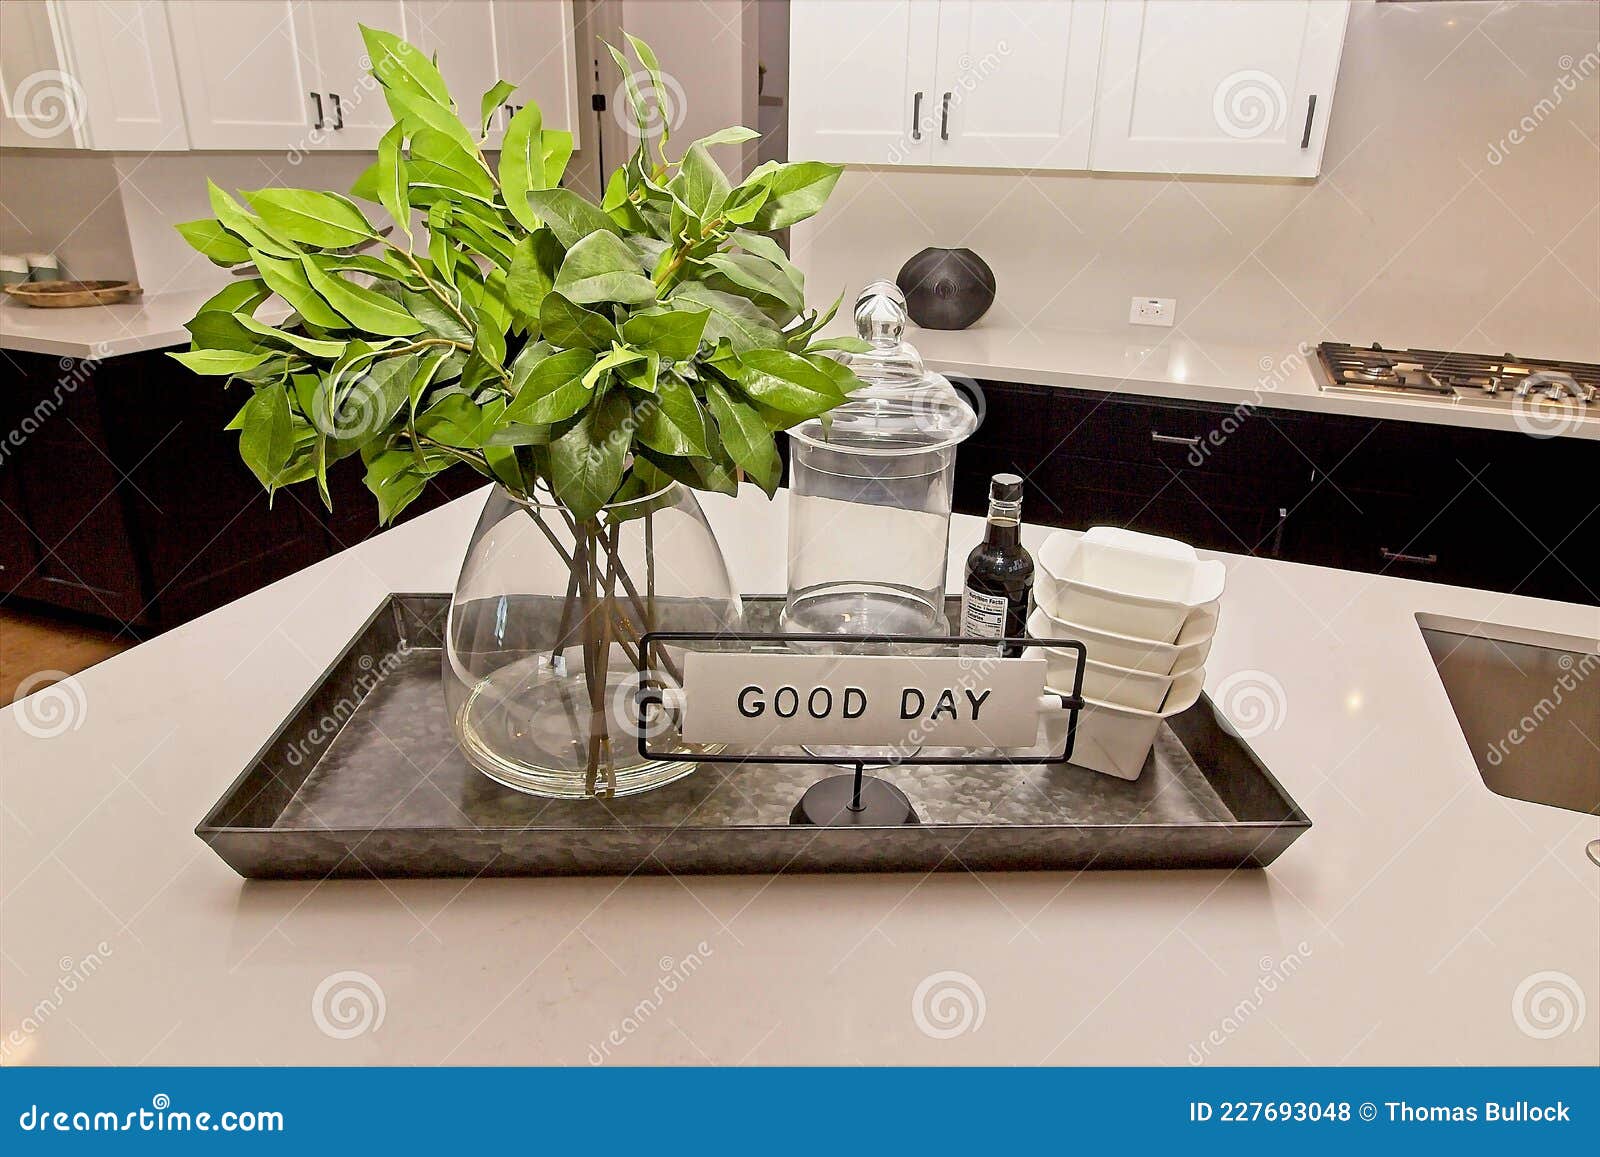 https://thumbs.dreamstime.com/z/decorator-tray-flowers-glass-container-white-square-bowls-kitchen-island-metal-containers-227693048.jpg